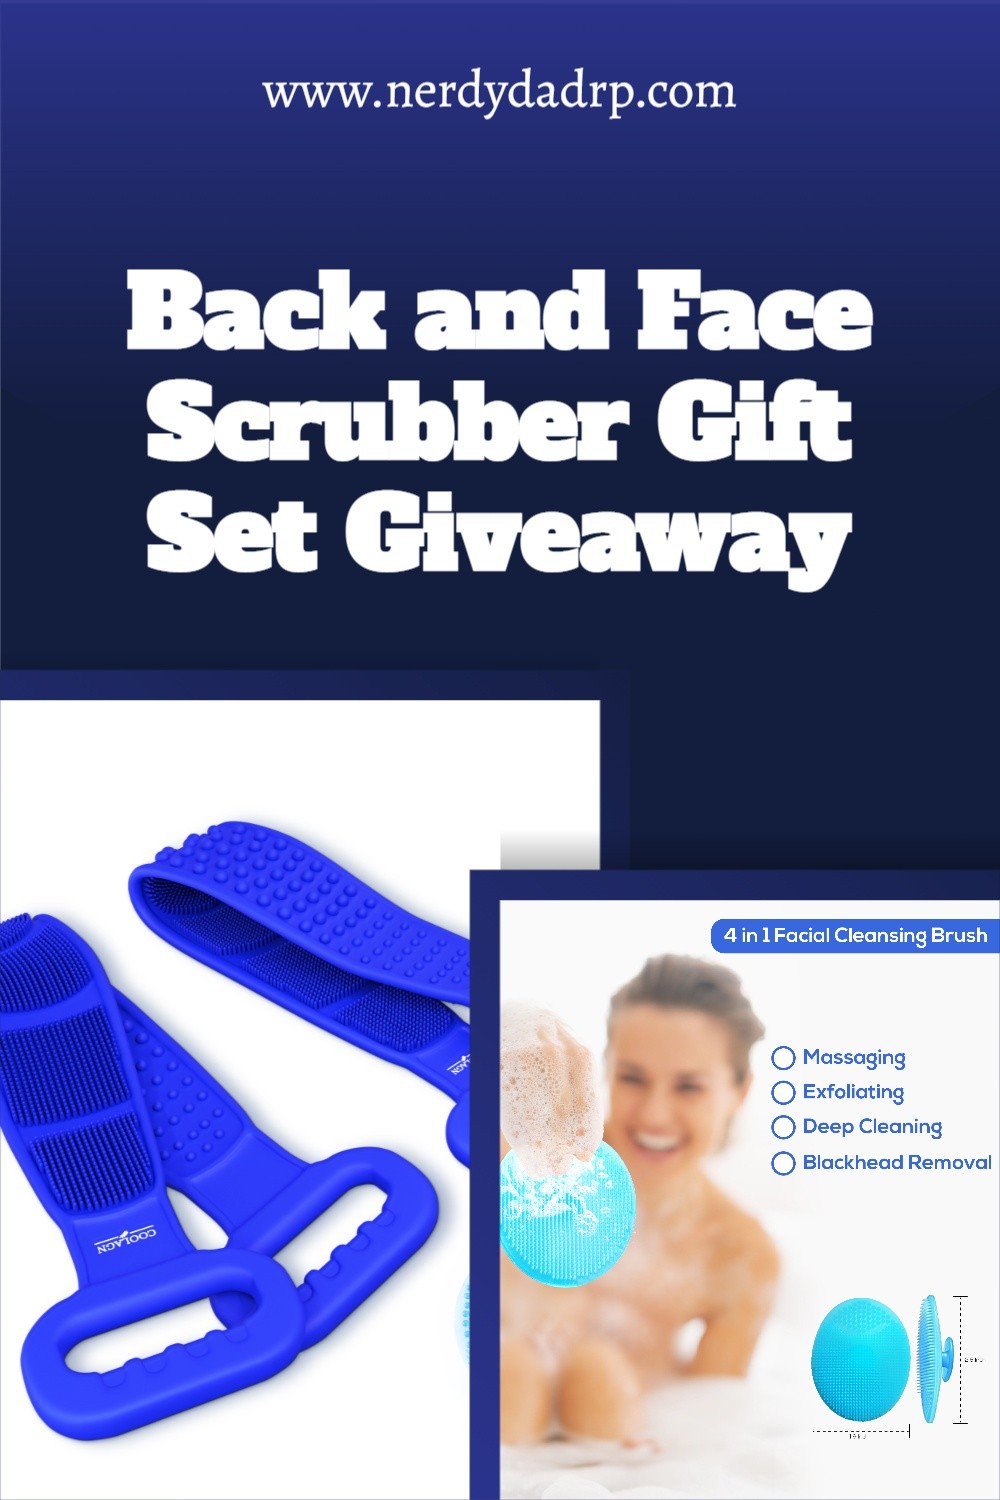 Back and Face Scrubber Gift Set Giveaway - Back and Face Scrubber Gift Set Giveaway! USA (Ends 4/15) @TheNerdyDadRP